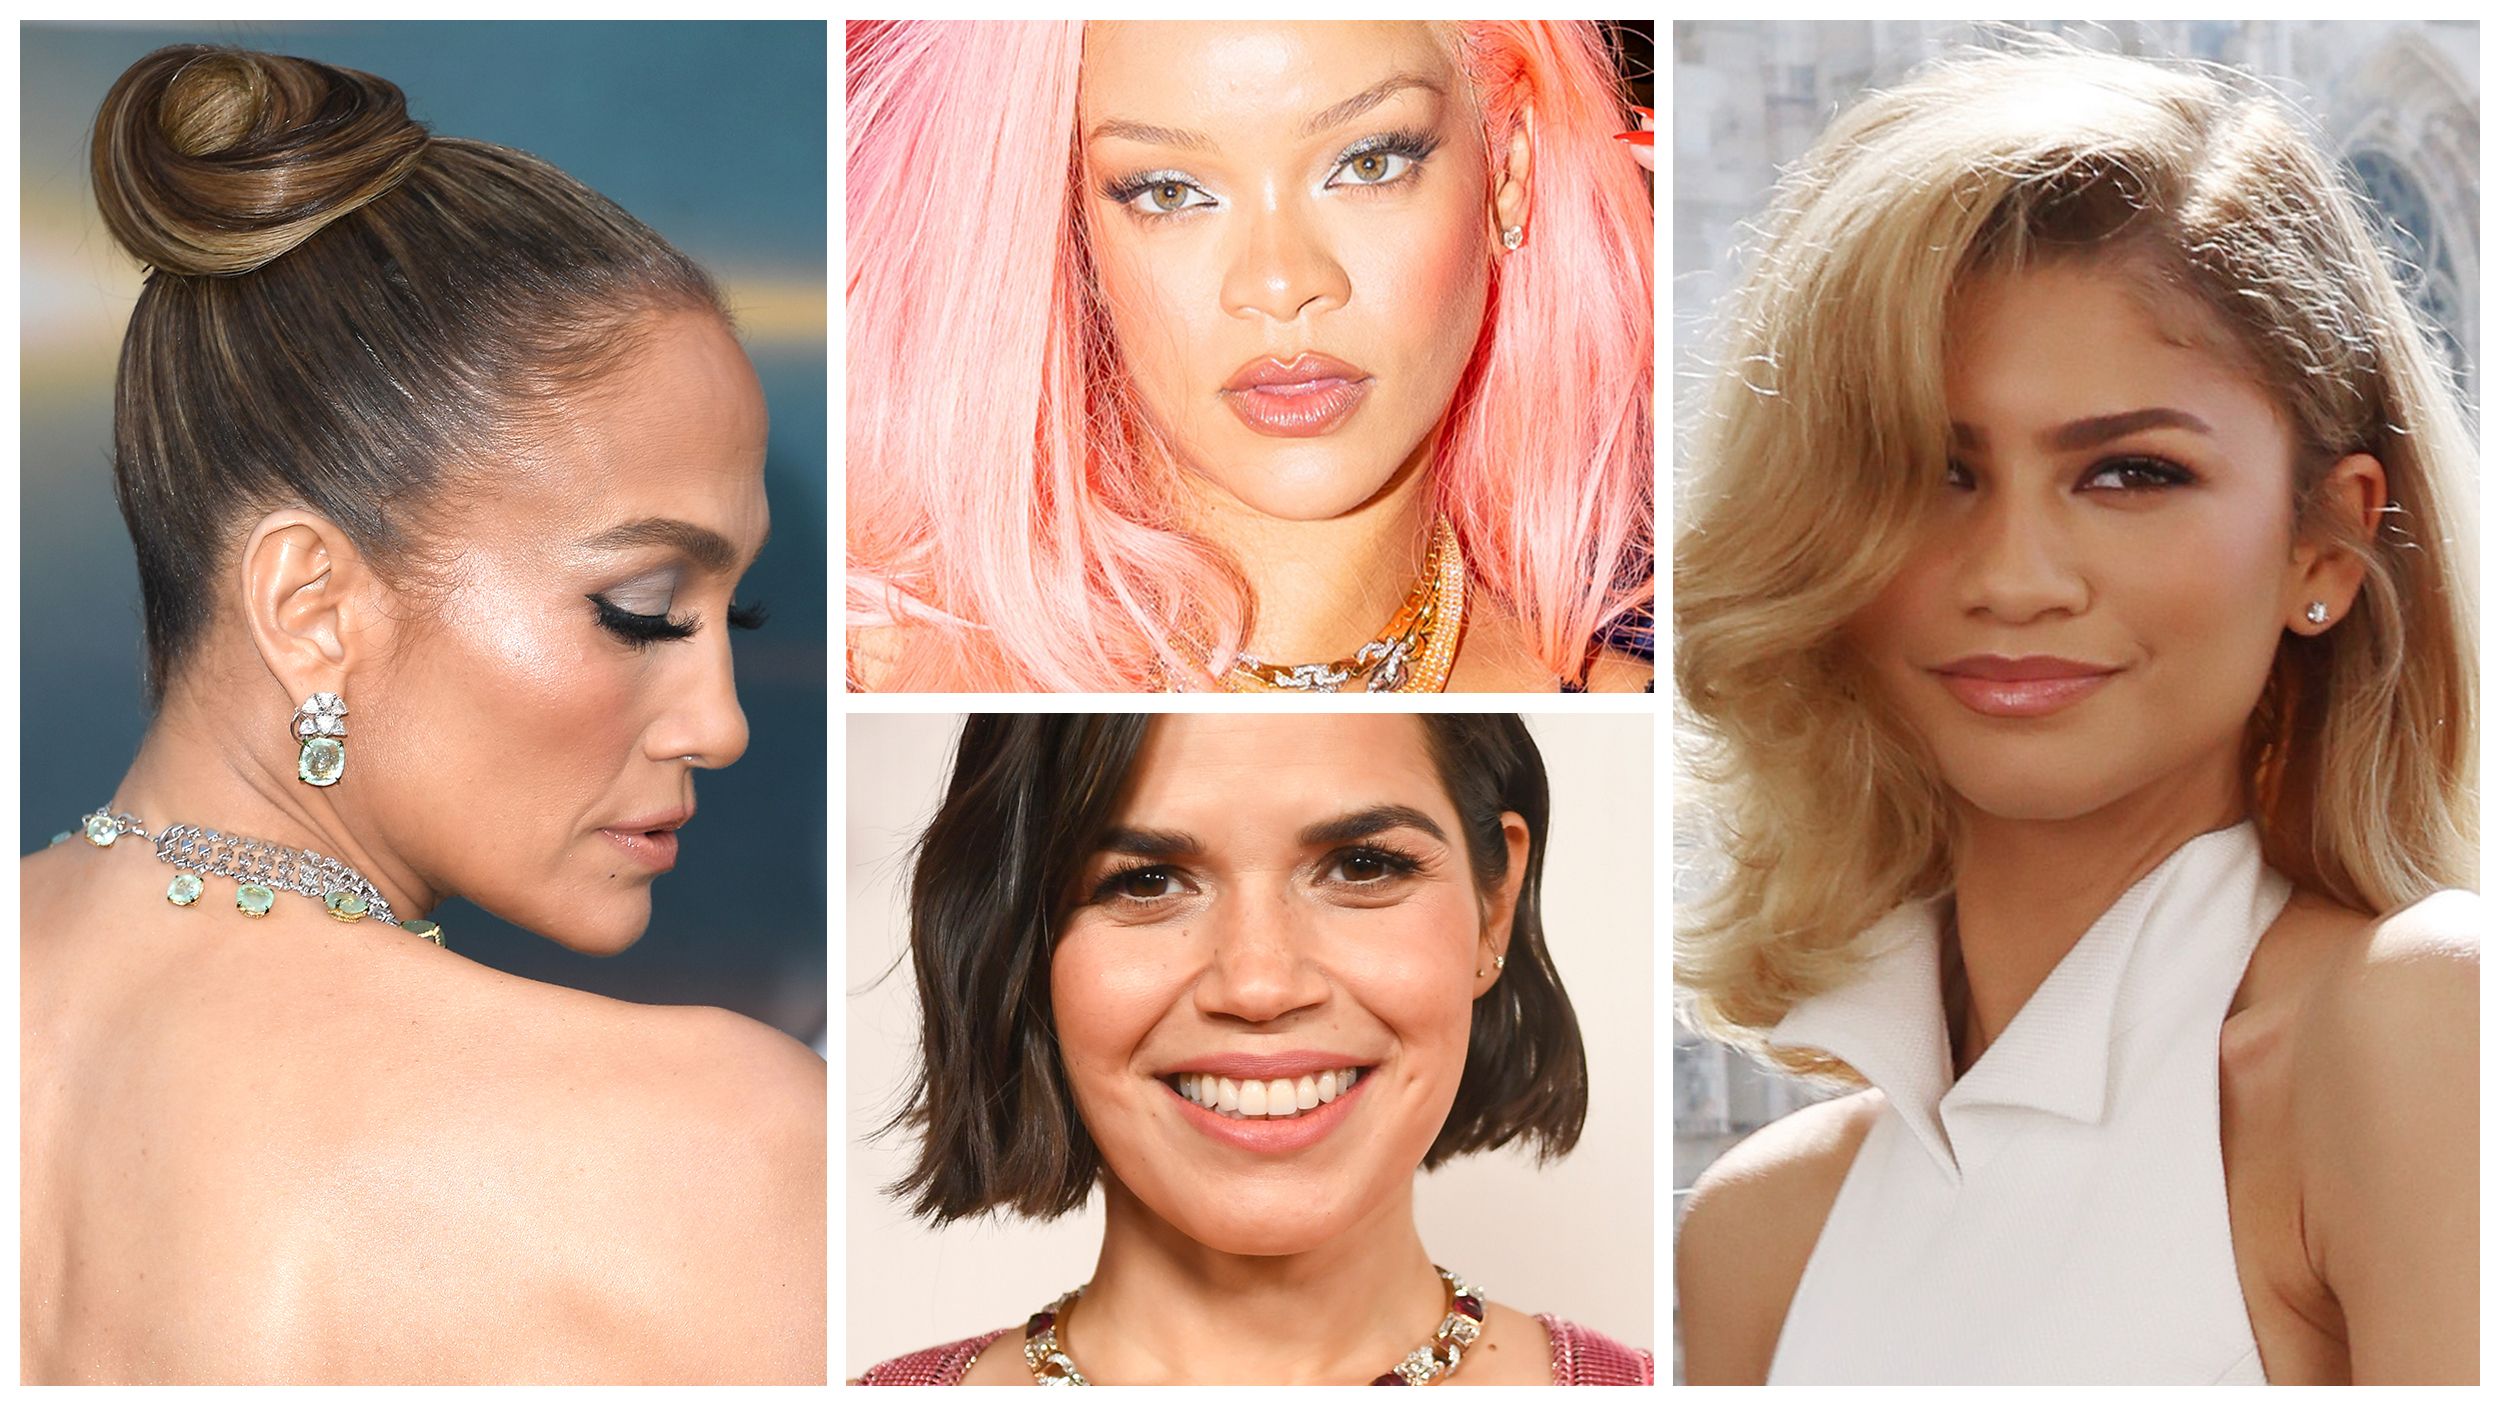 10 Hairstyles That Make You Look Younger